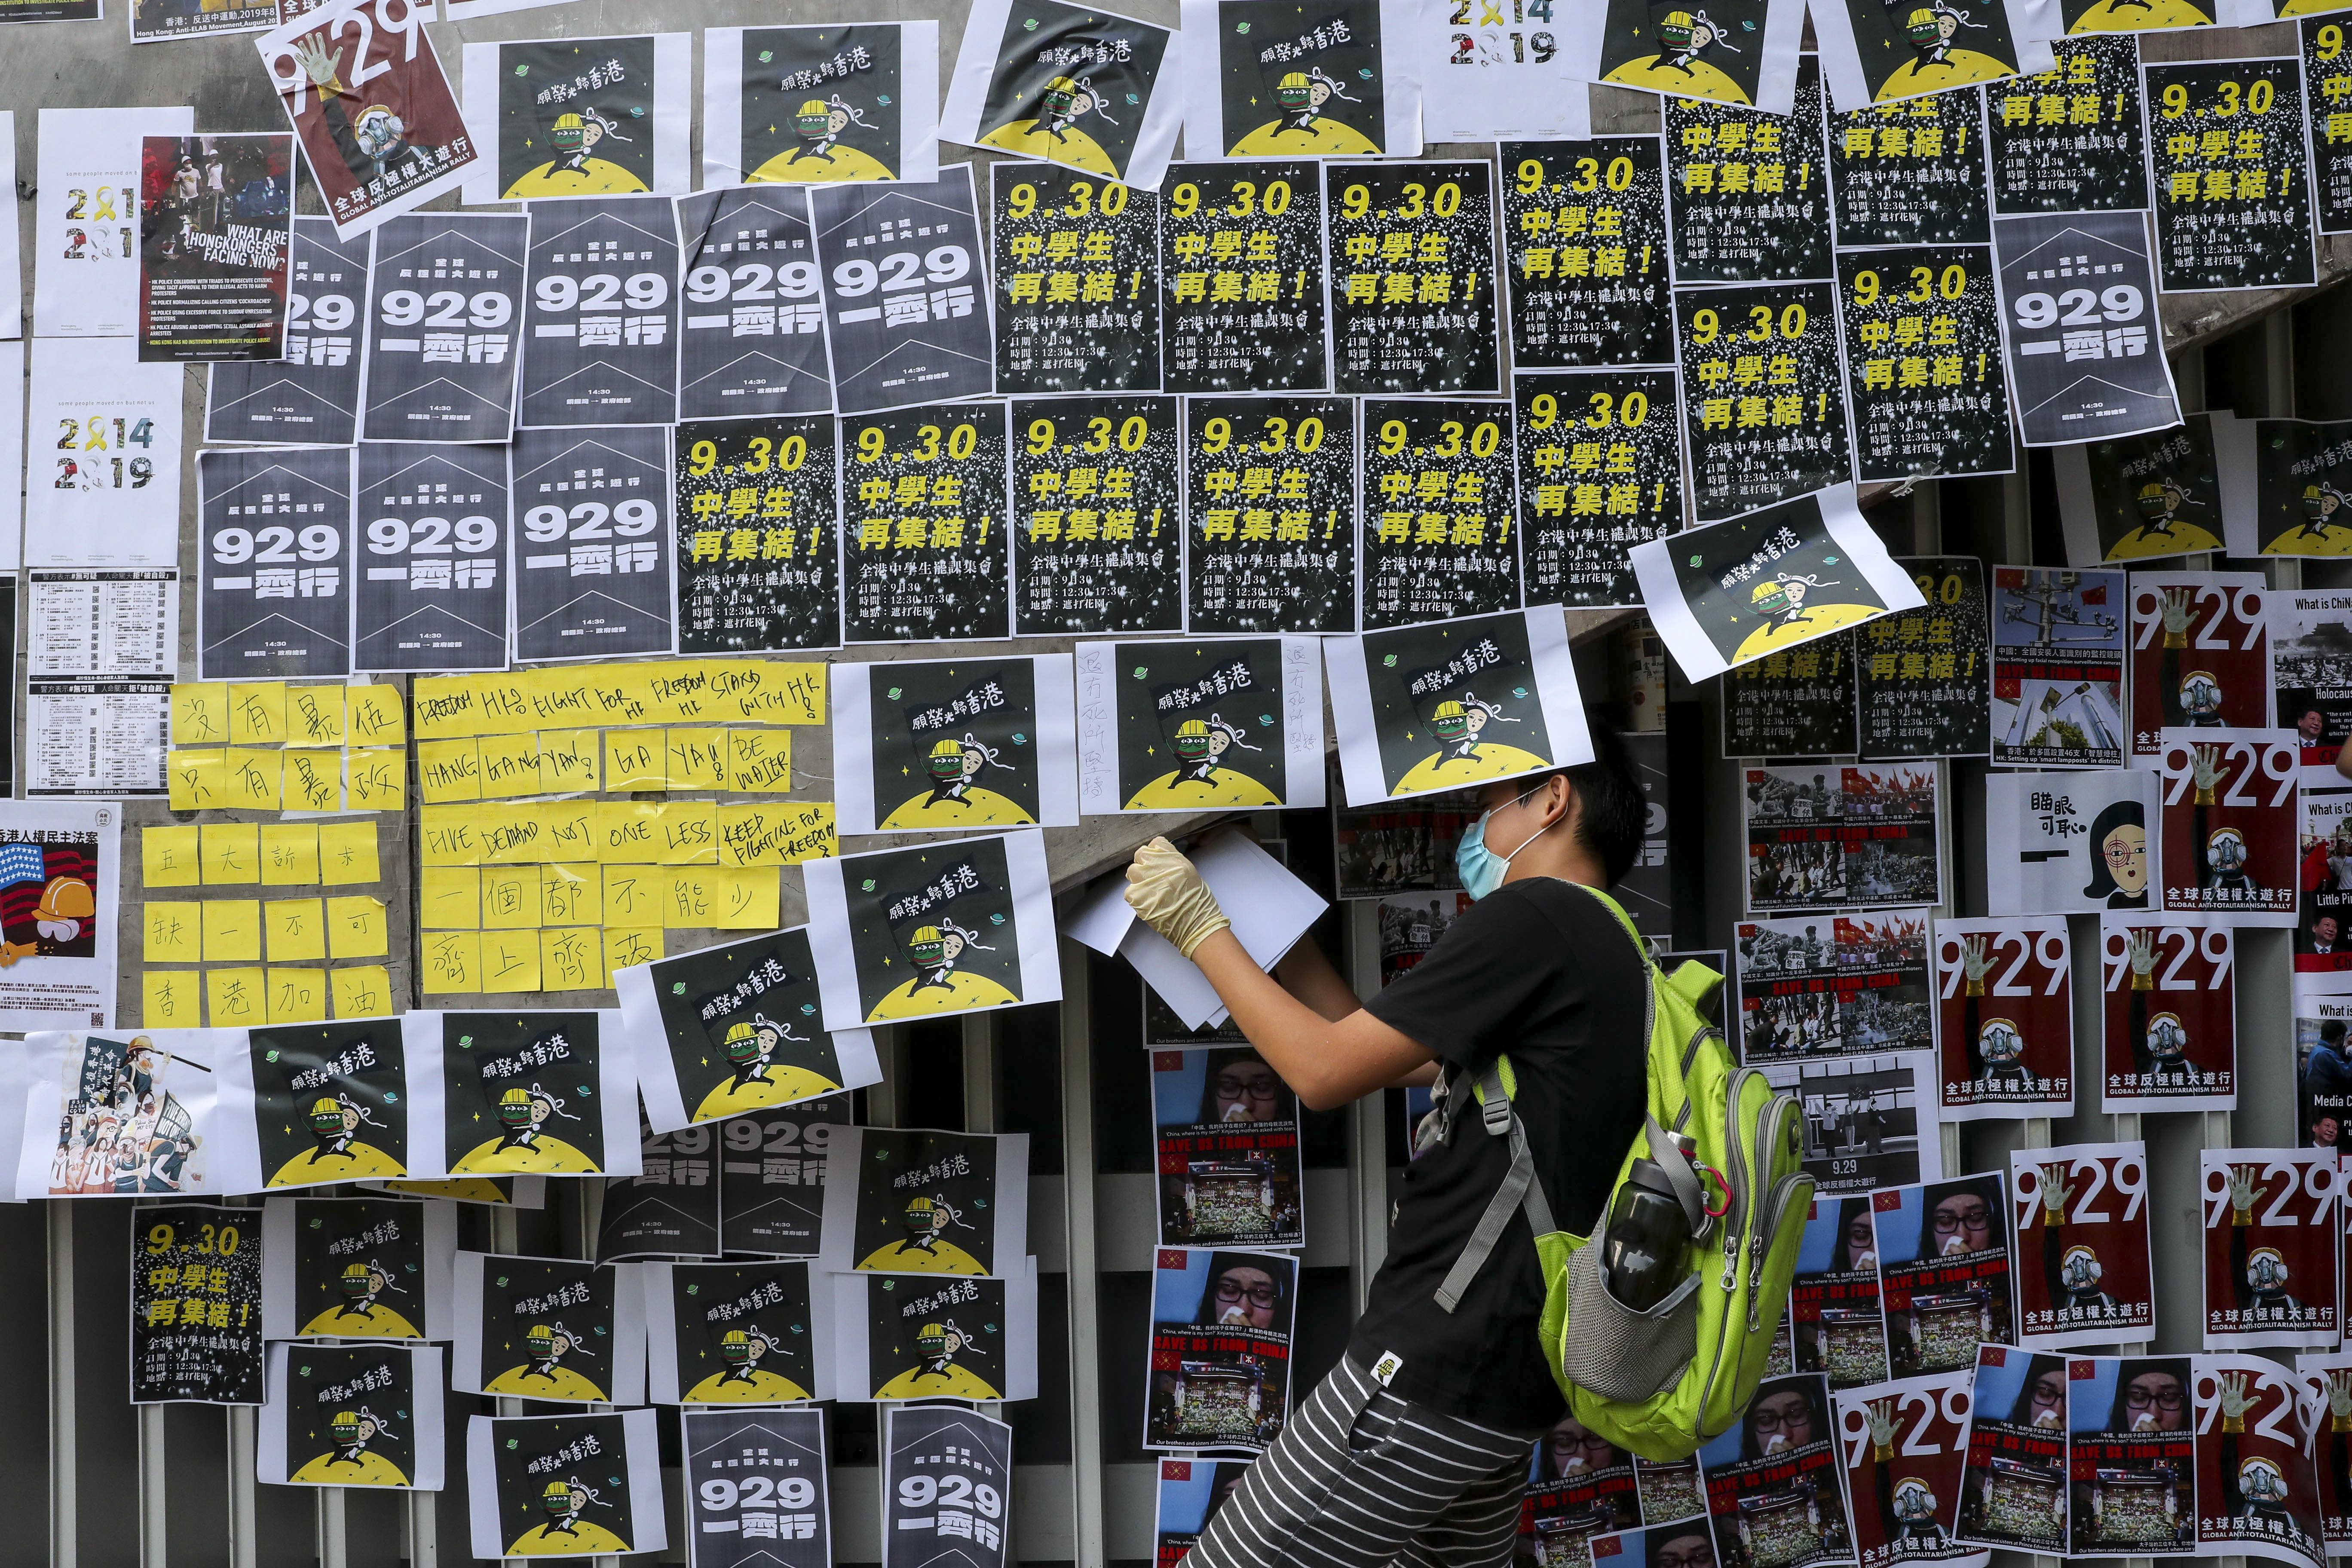 A Lennon Wall in Admiralty on Saturday as activists mark the fifth anniversary of the Occupy movement. Photo: Sam Tsang